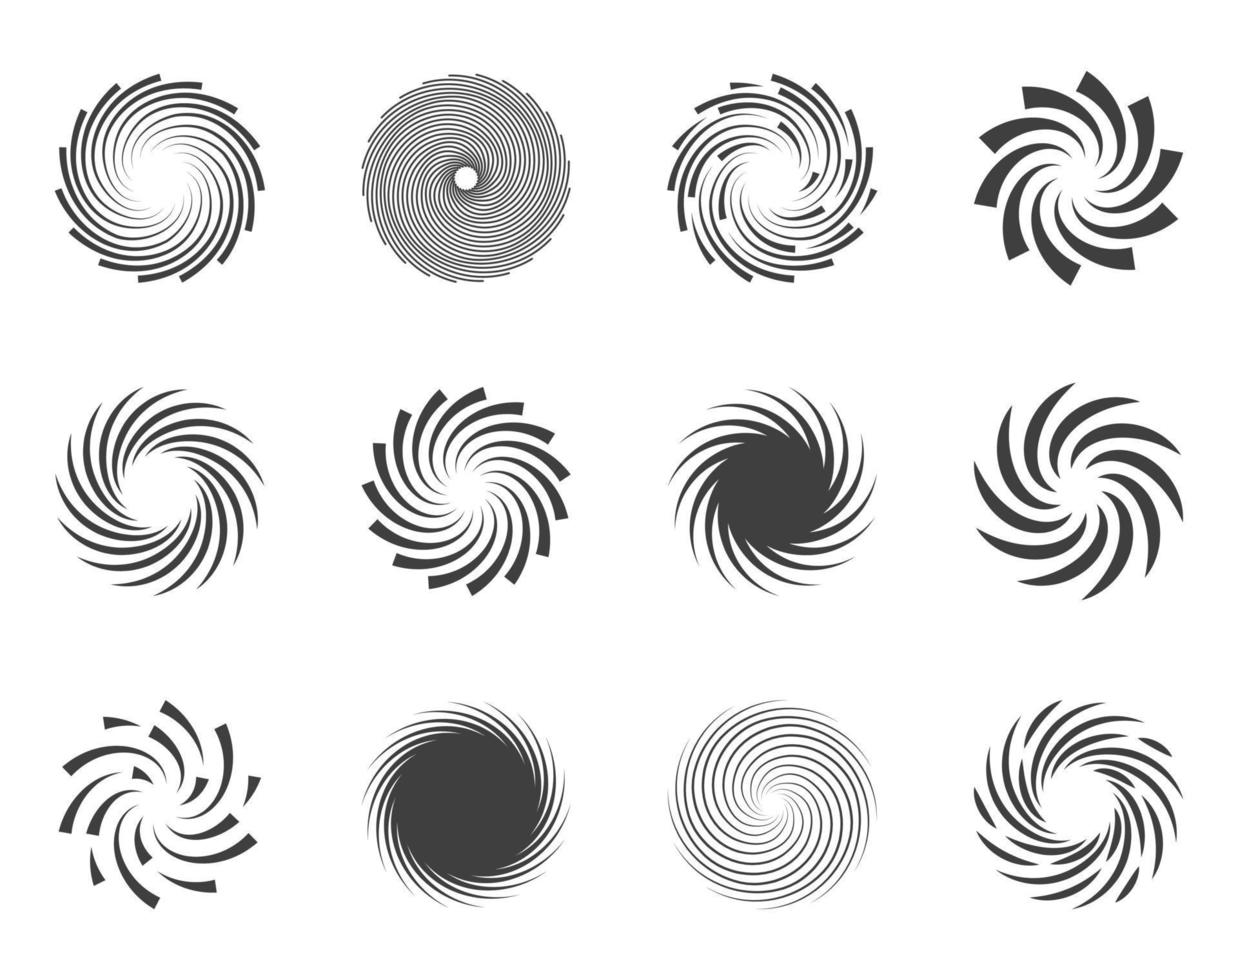 Spiral and swirl motion twisting circles design element set vector